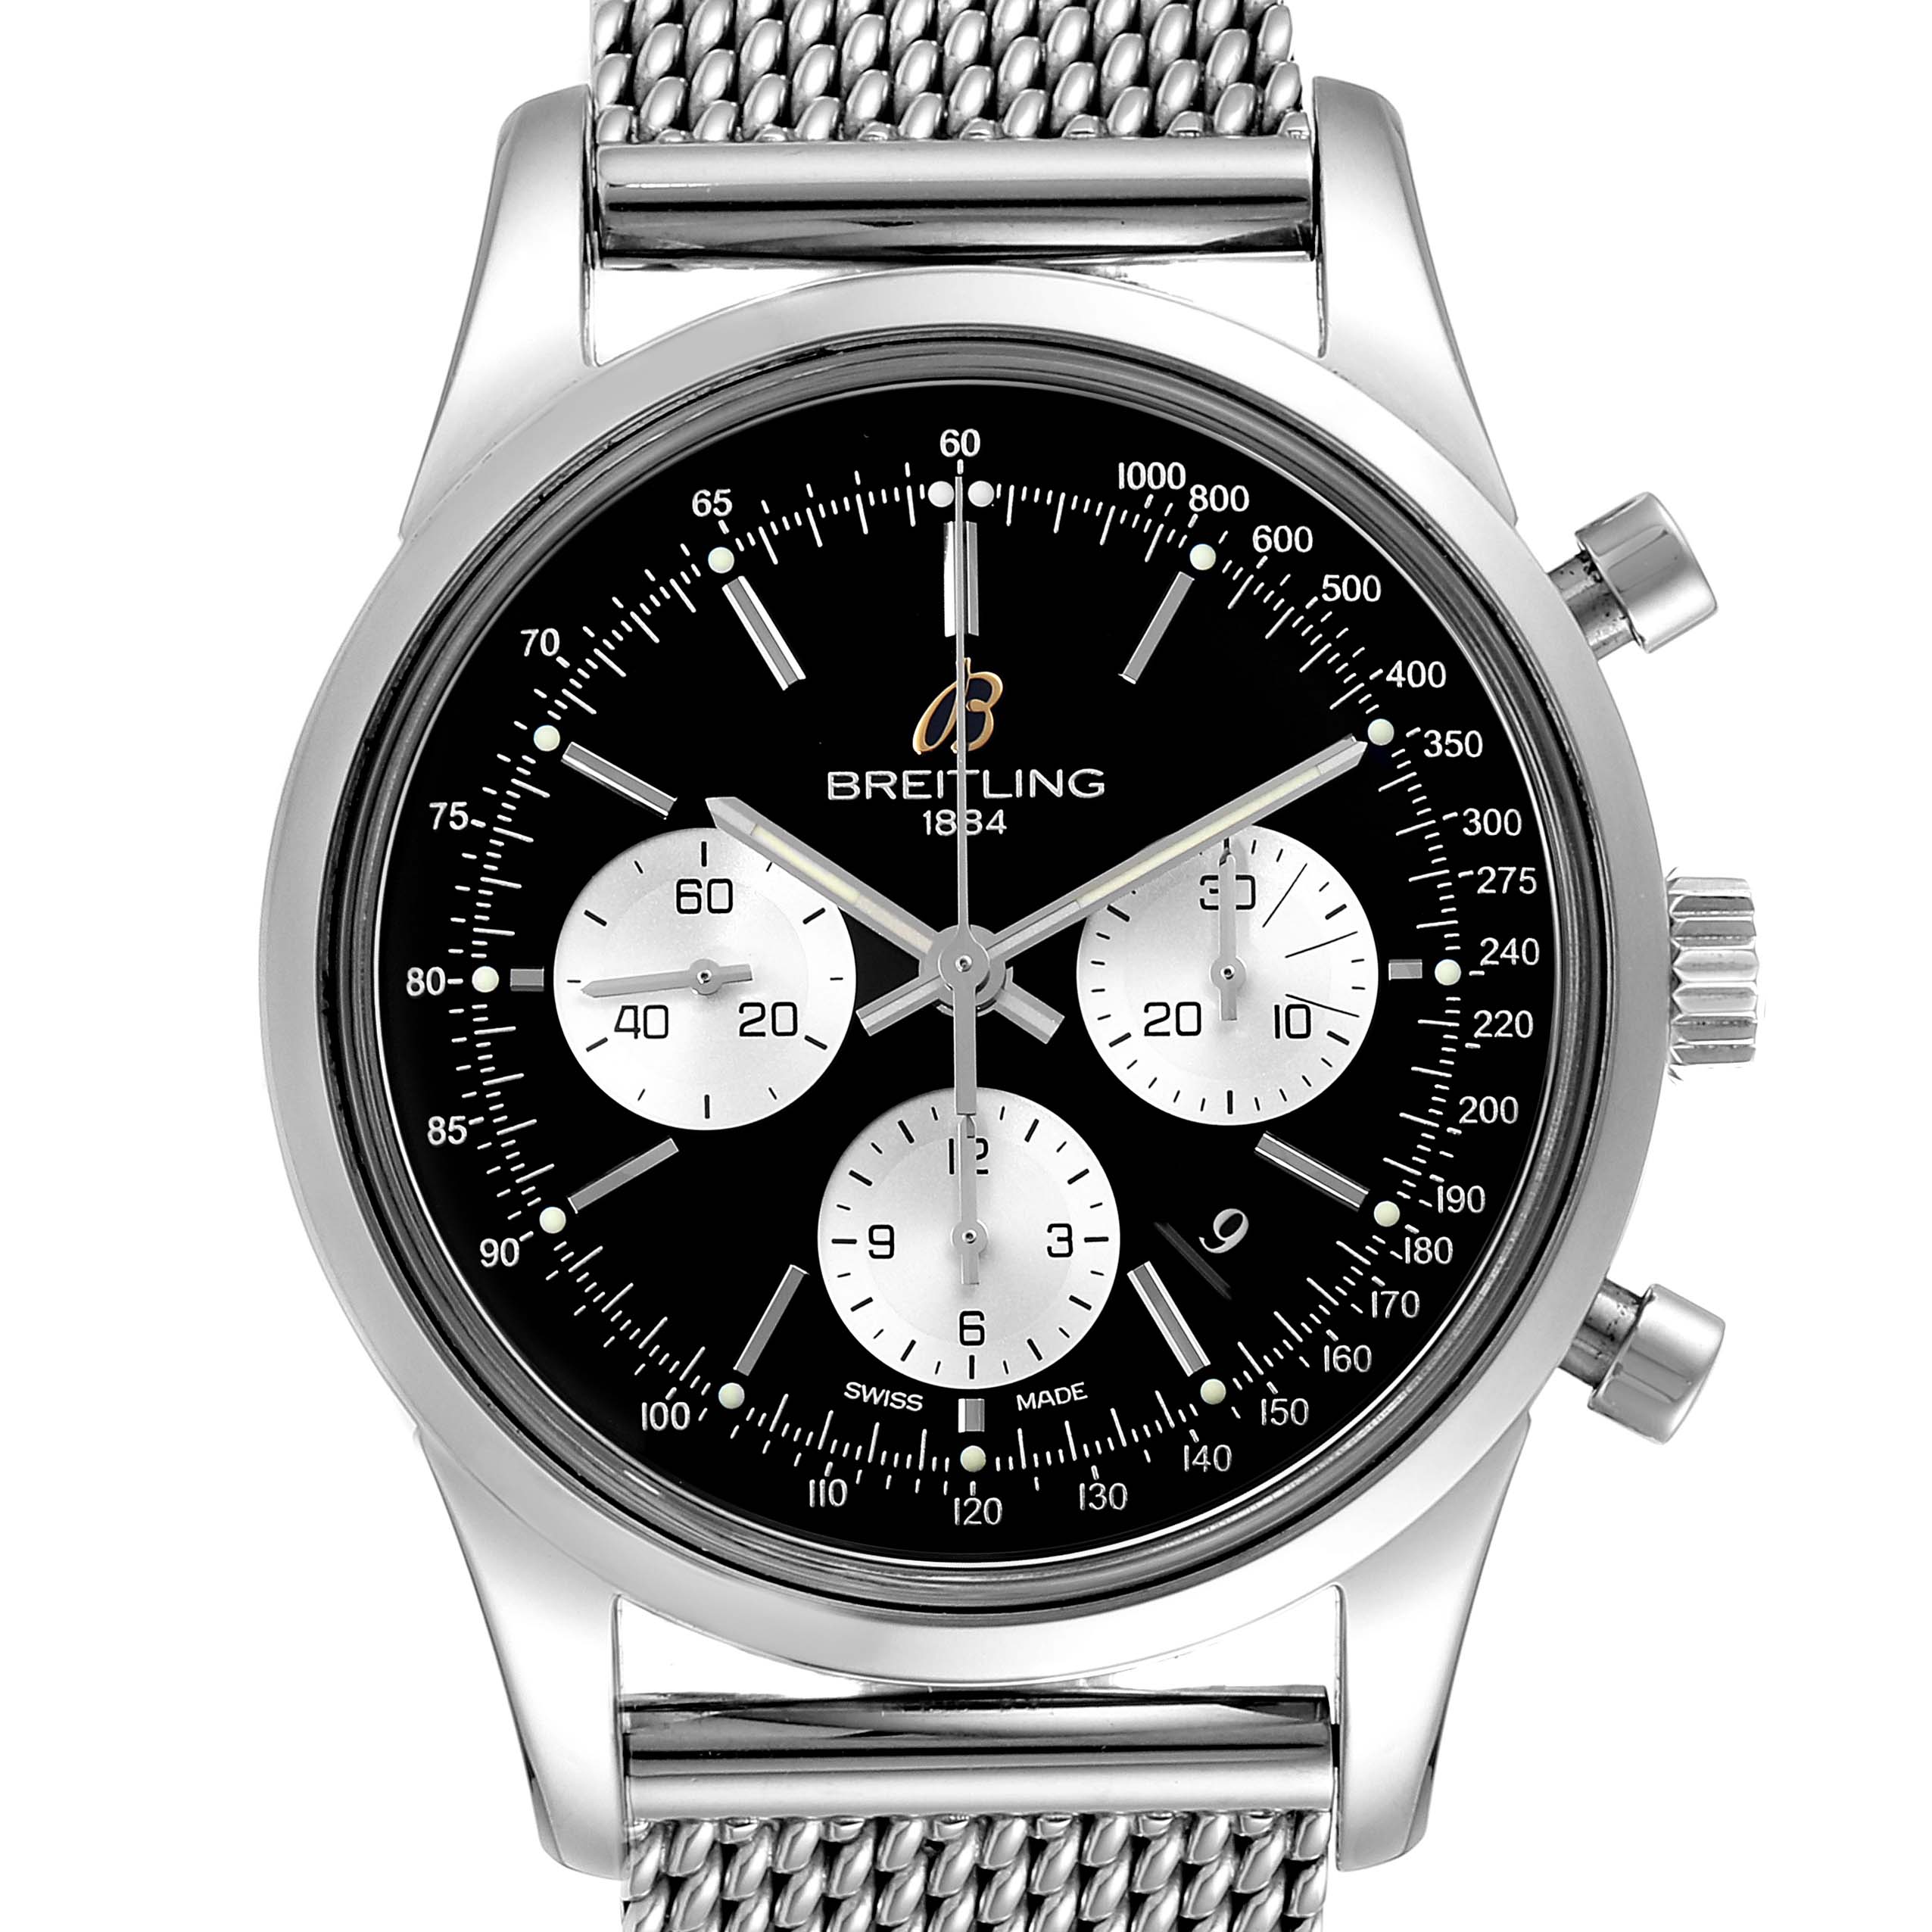 Breitling Transocean chronograph GMT limited edition for Rs